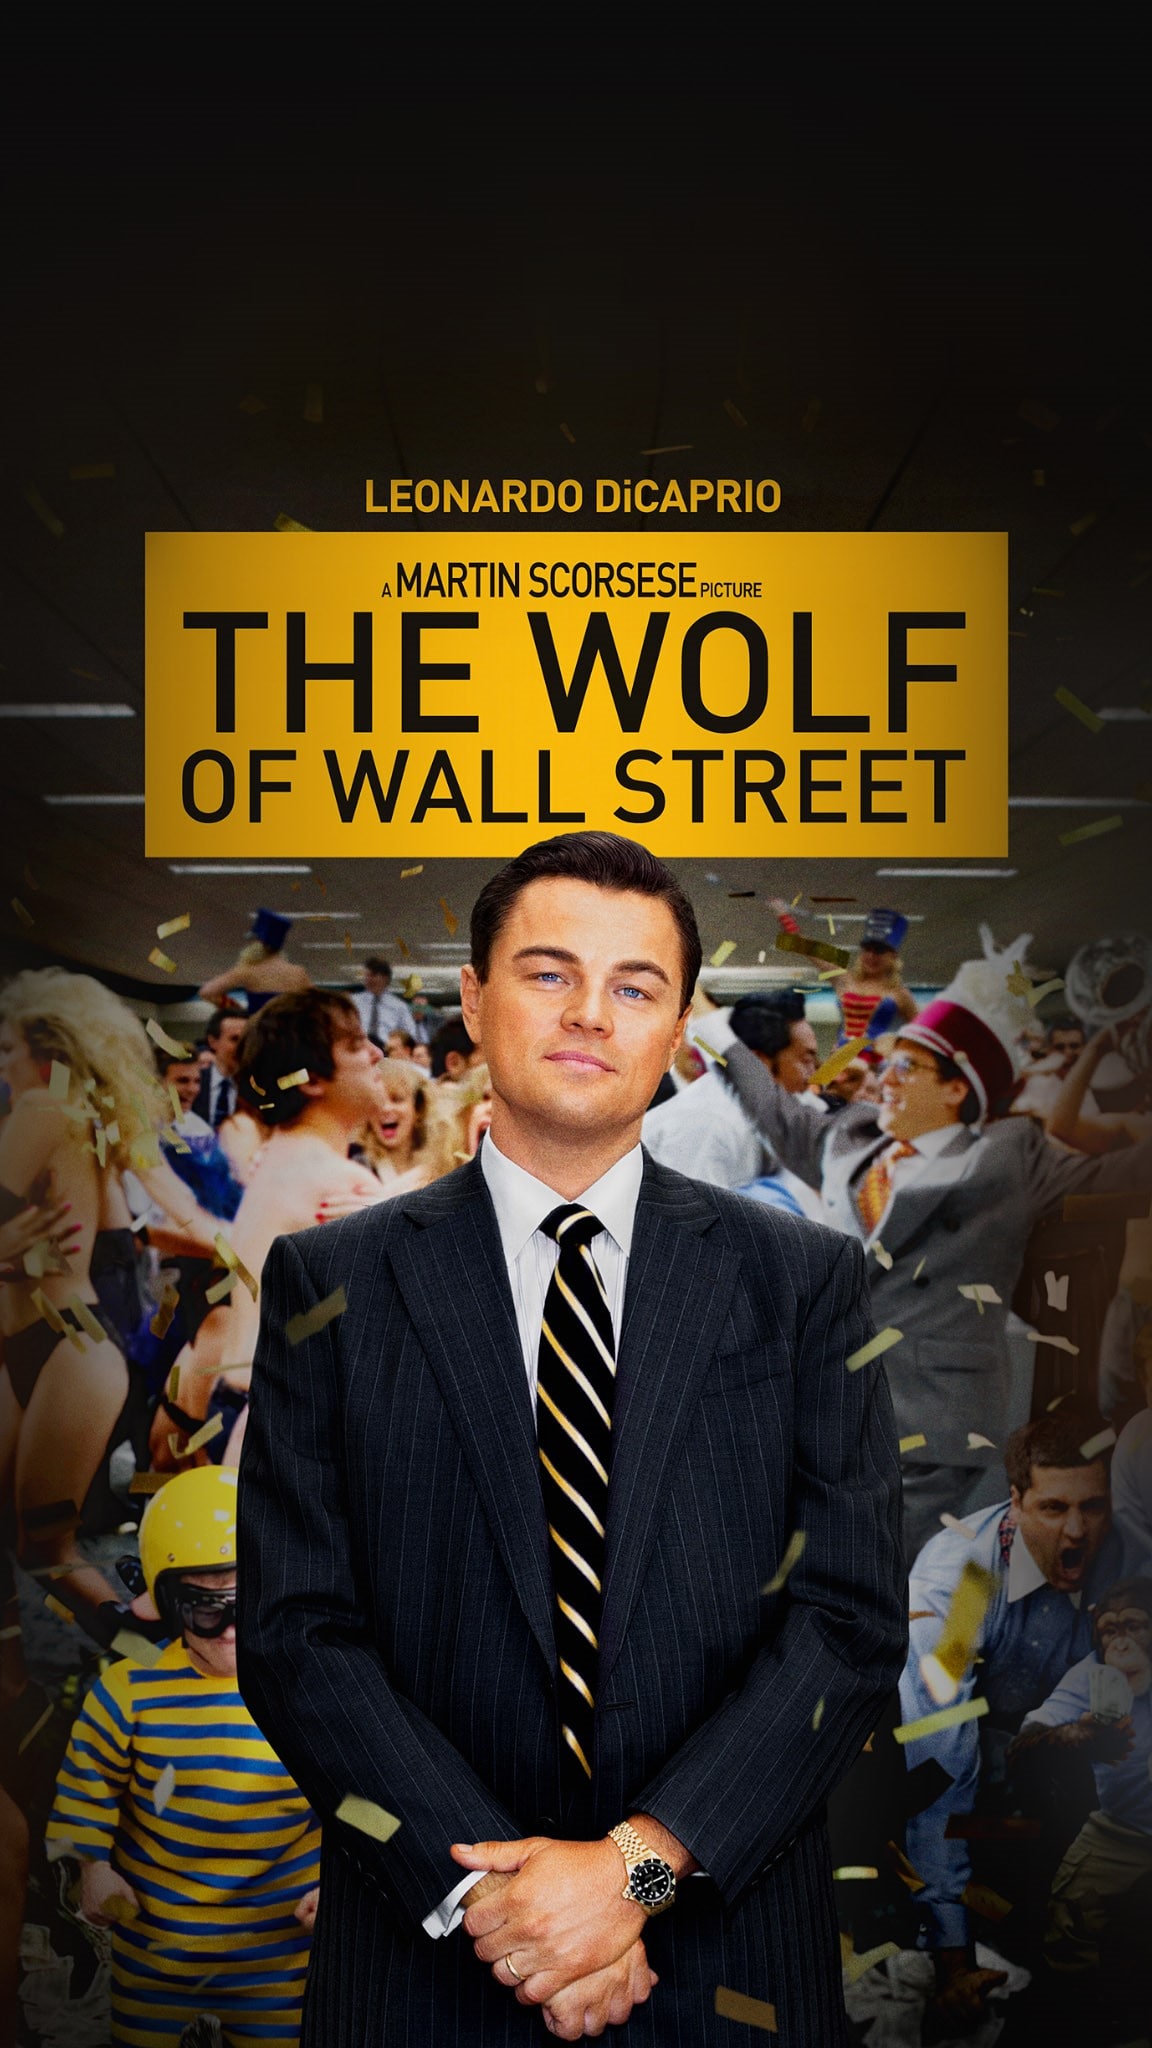 italian the wolf of wall street full movie download free